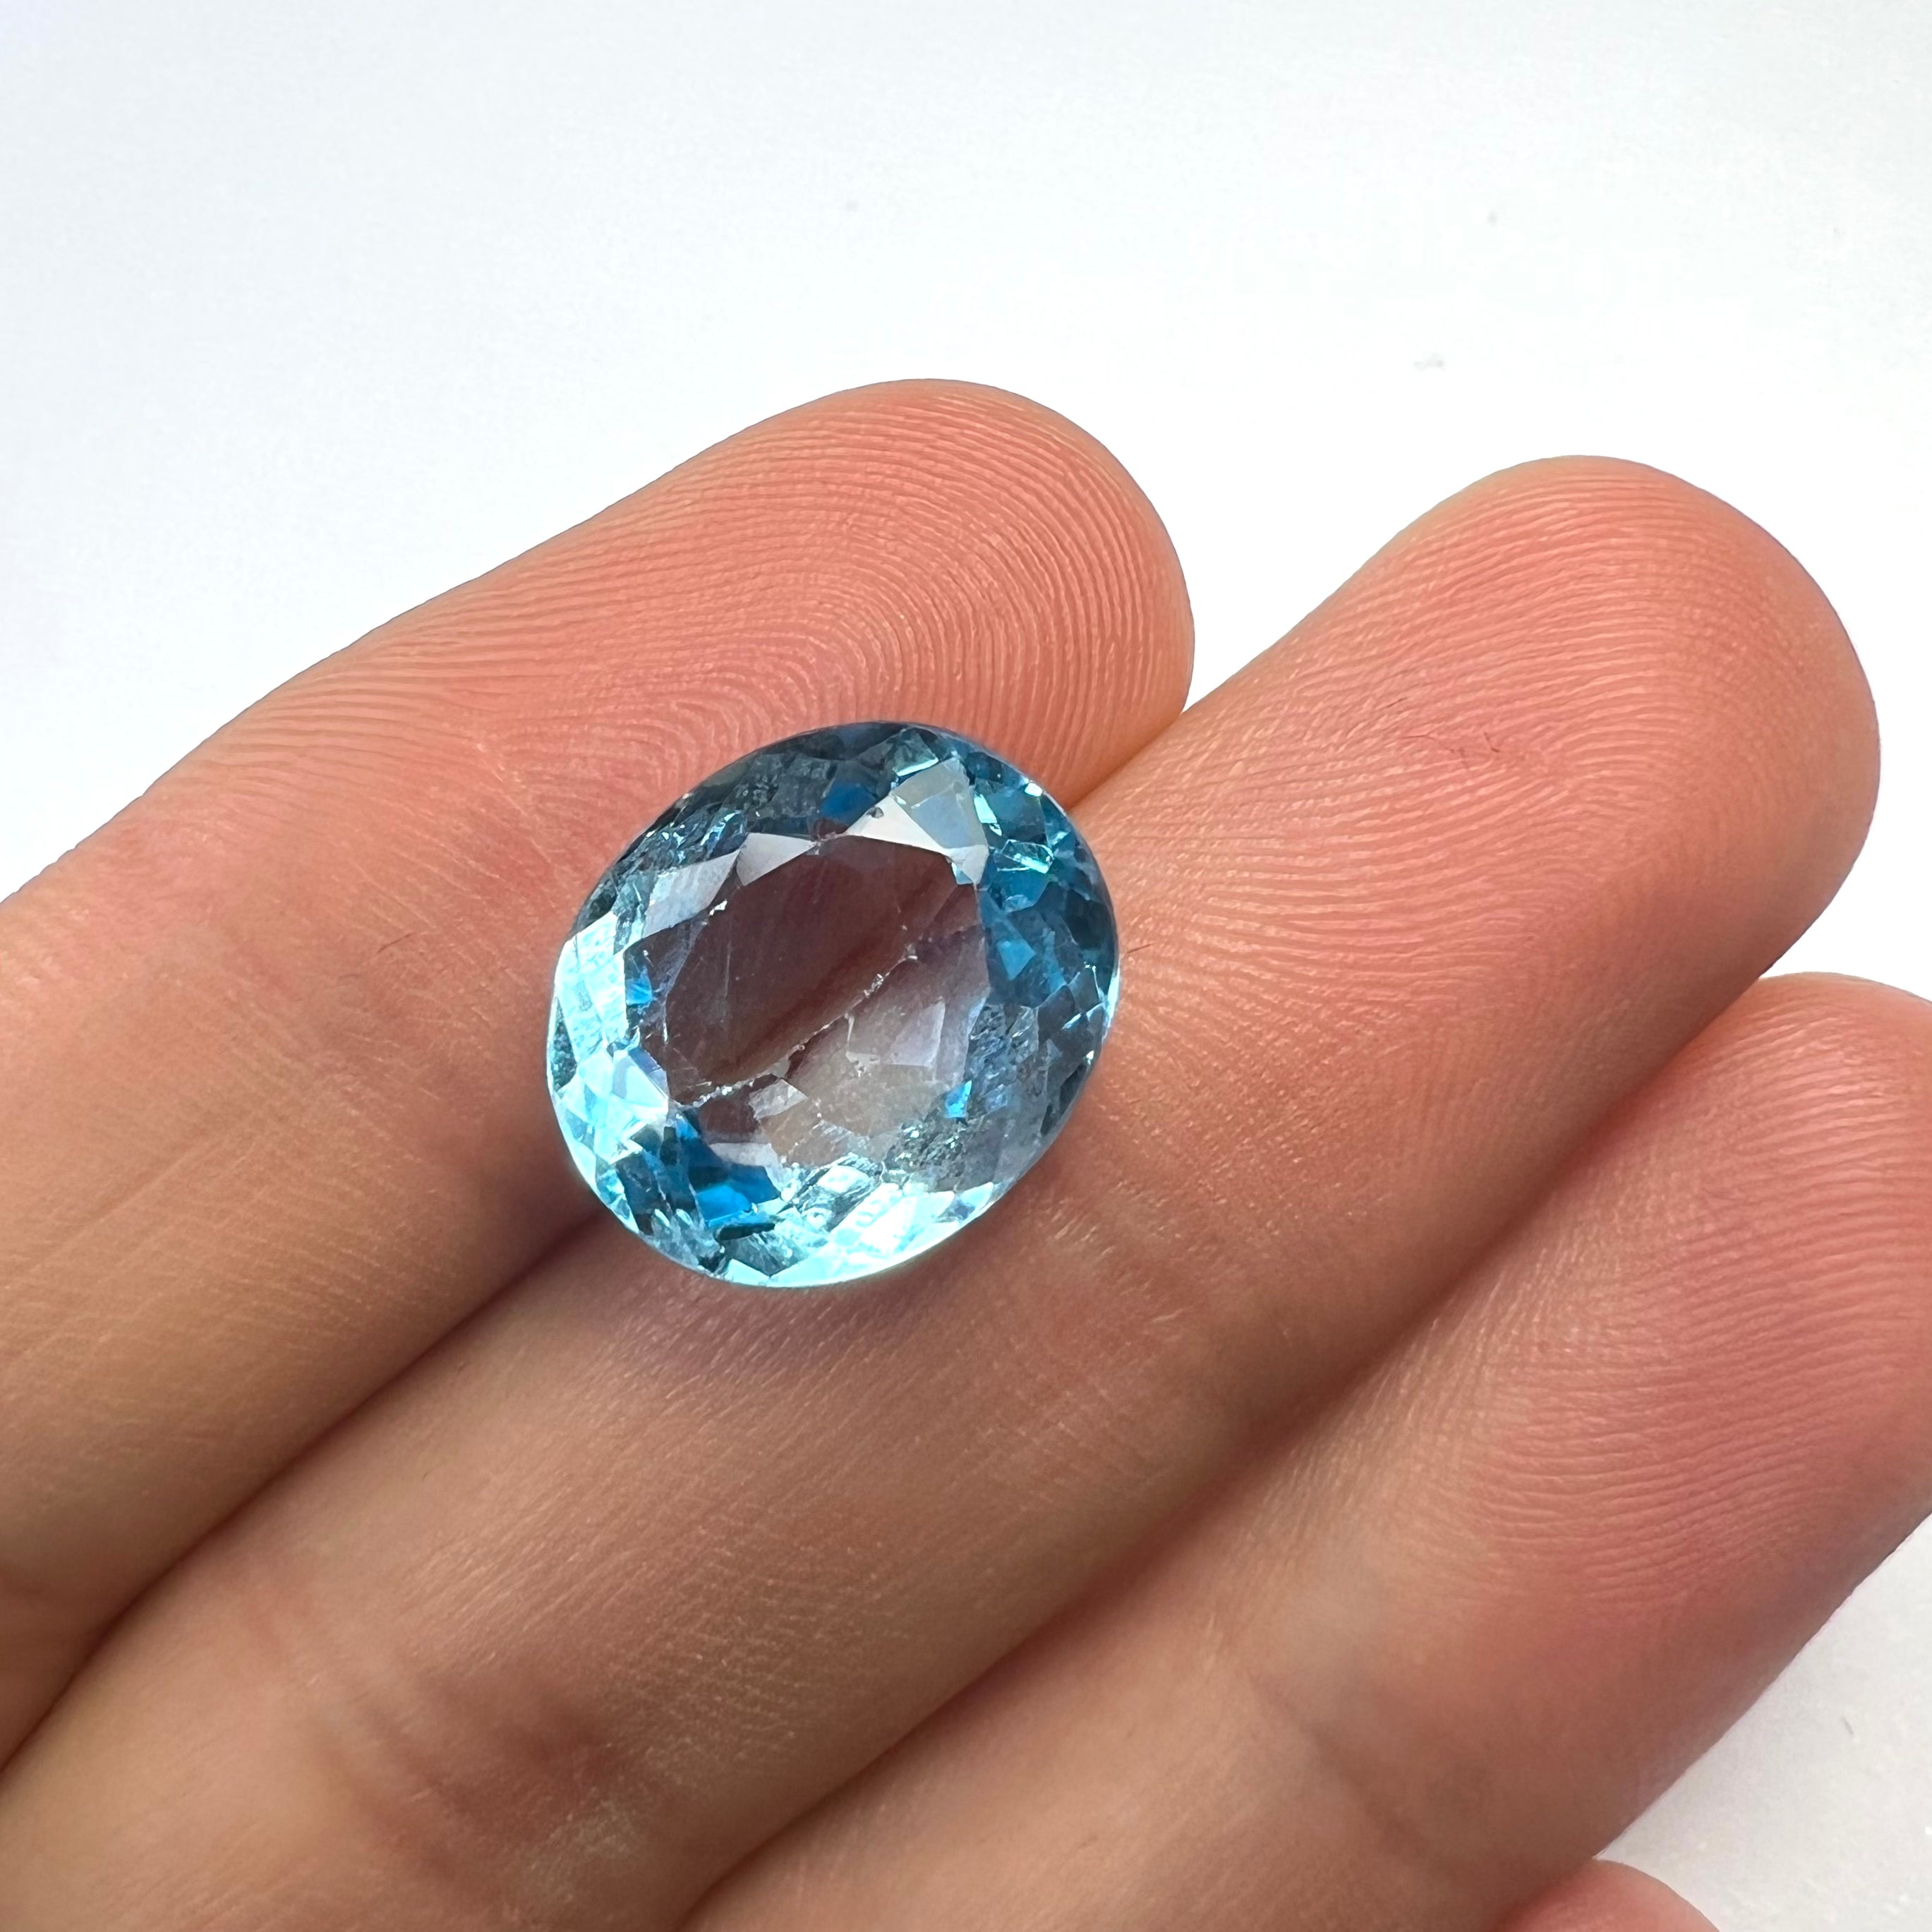 10.69CTW Loose Natural Oval Cut Topaz 14.3x12.1x7.2mm Earth mined Gemstone